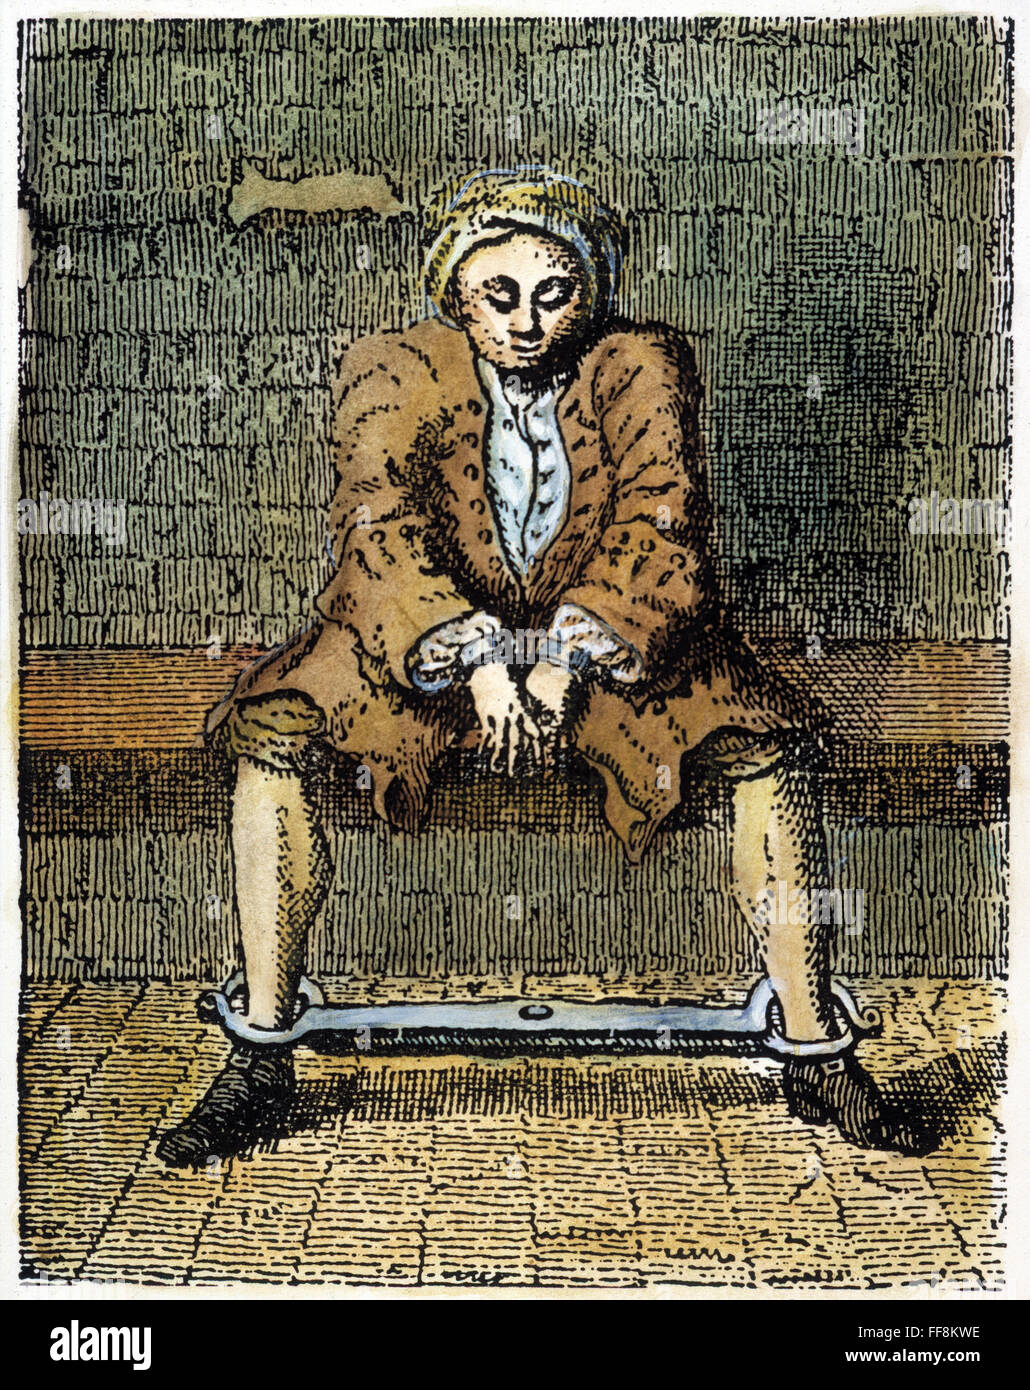 LONDON: DEBTOR'S PRISON. /nDebtor wearing shears at the Marshalsea Prison, London. Colored line engraving, 18th century. Stock Photo